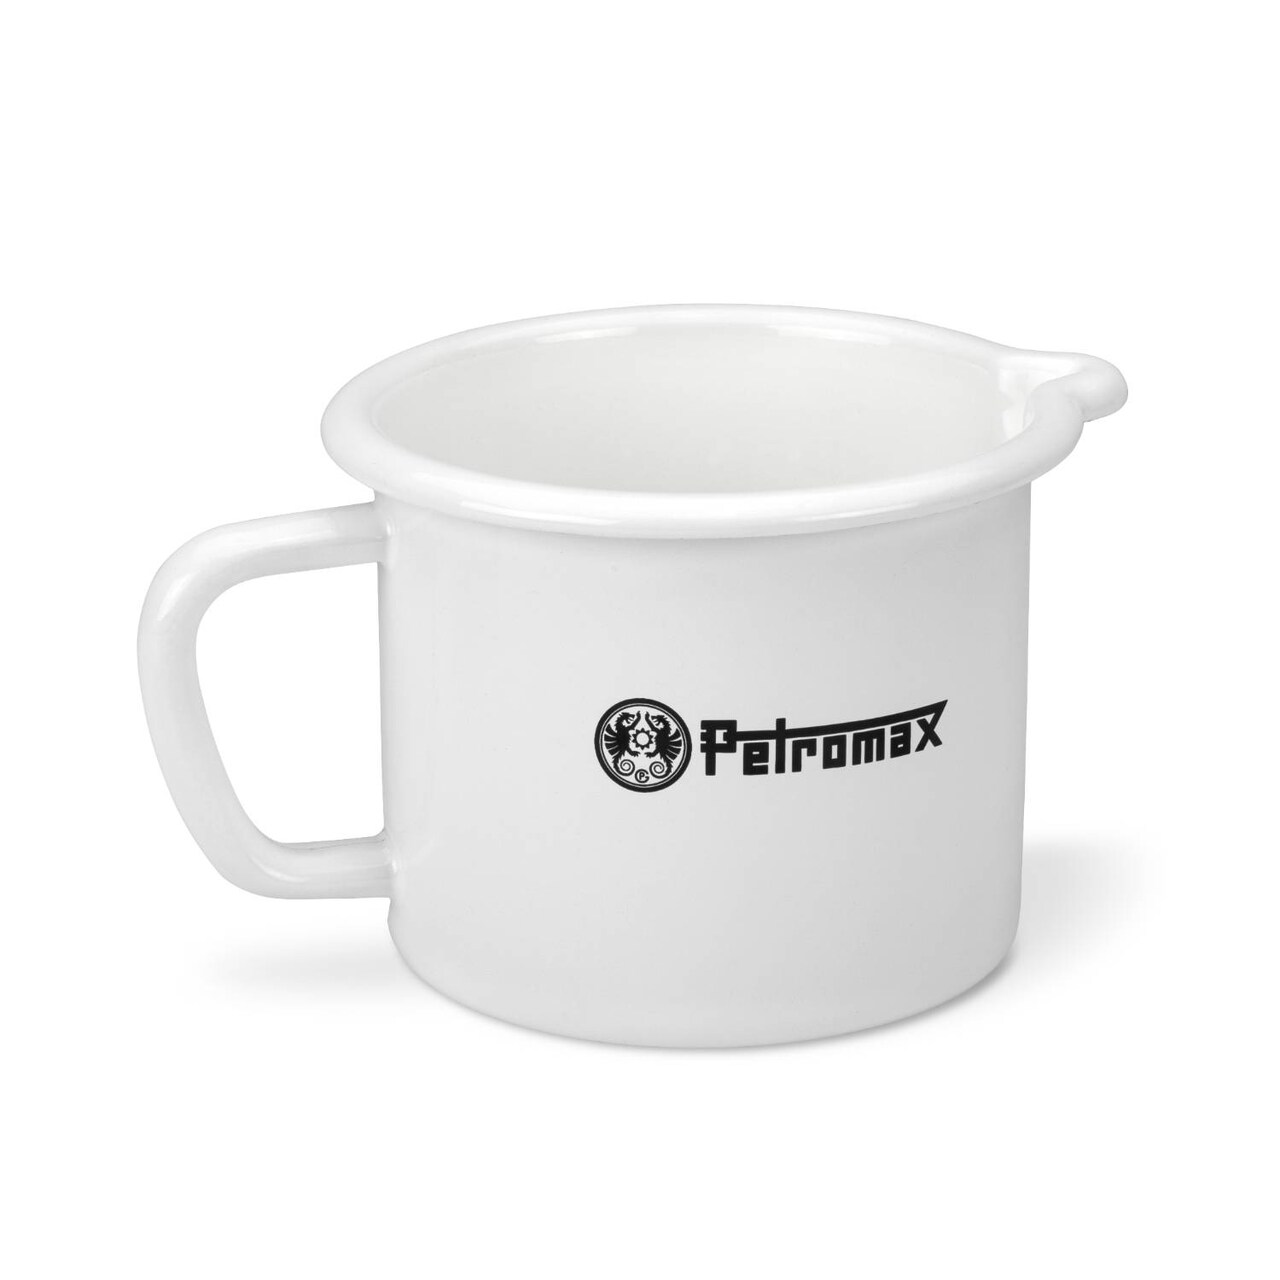 Petromax Warming Pot with Spout, Enameled Steel Saucepan for Heating Milk,  Soup, Butter over Stove or Campfire